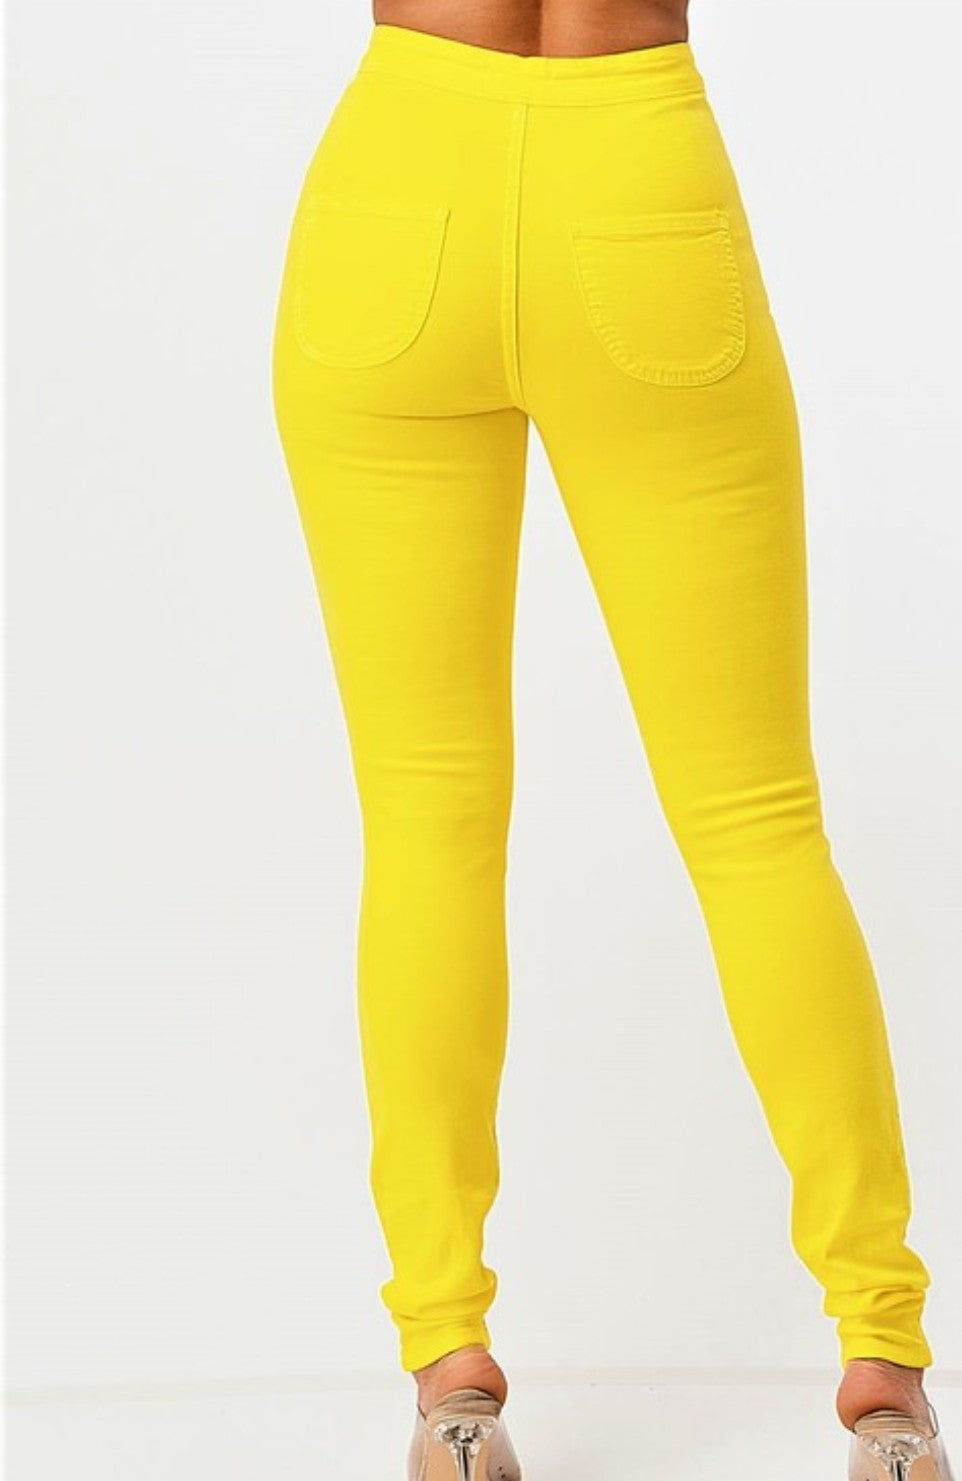 $15.99 Super Swank High Waist Stretchy Jeans - Neon Yellow